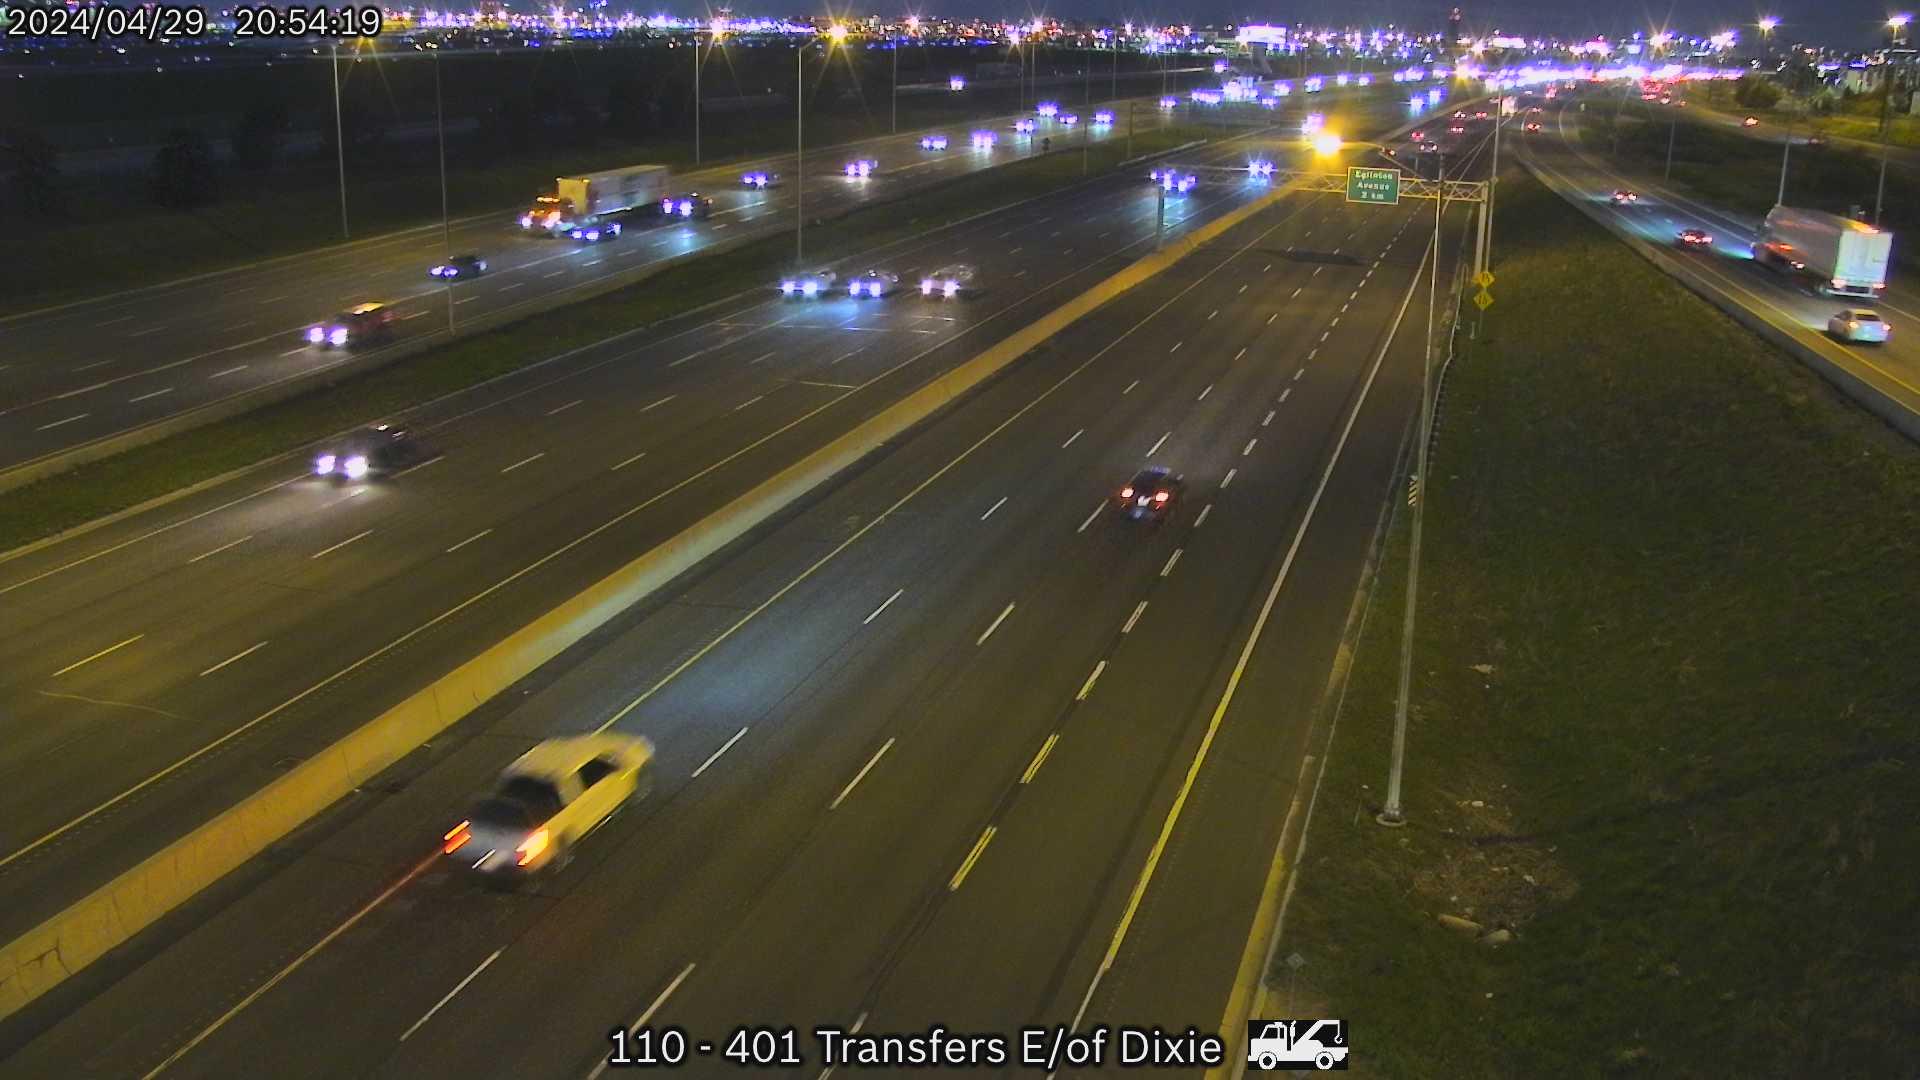 Mississauga: Highway 401 near Transfer (east of Dixie) Traffic Camera